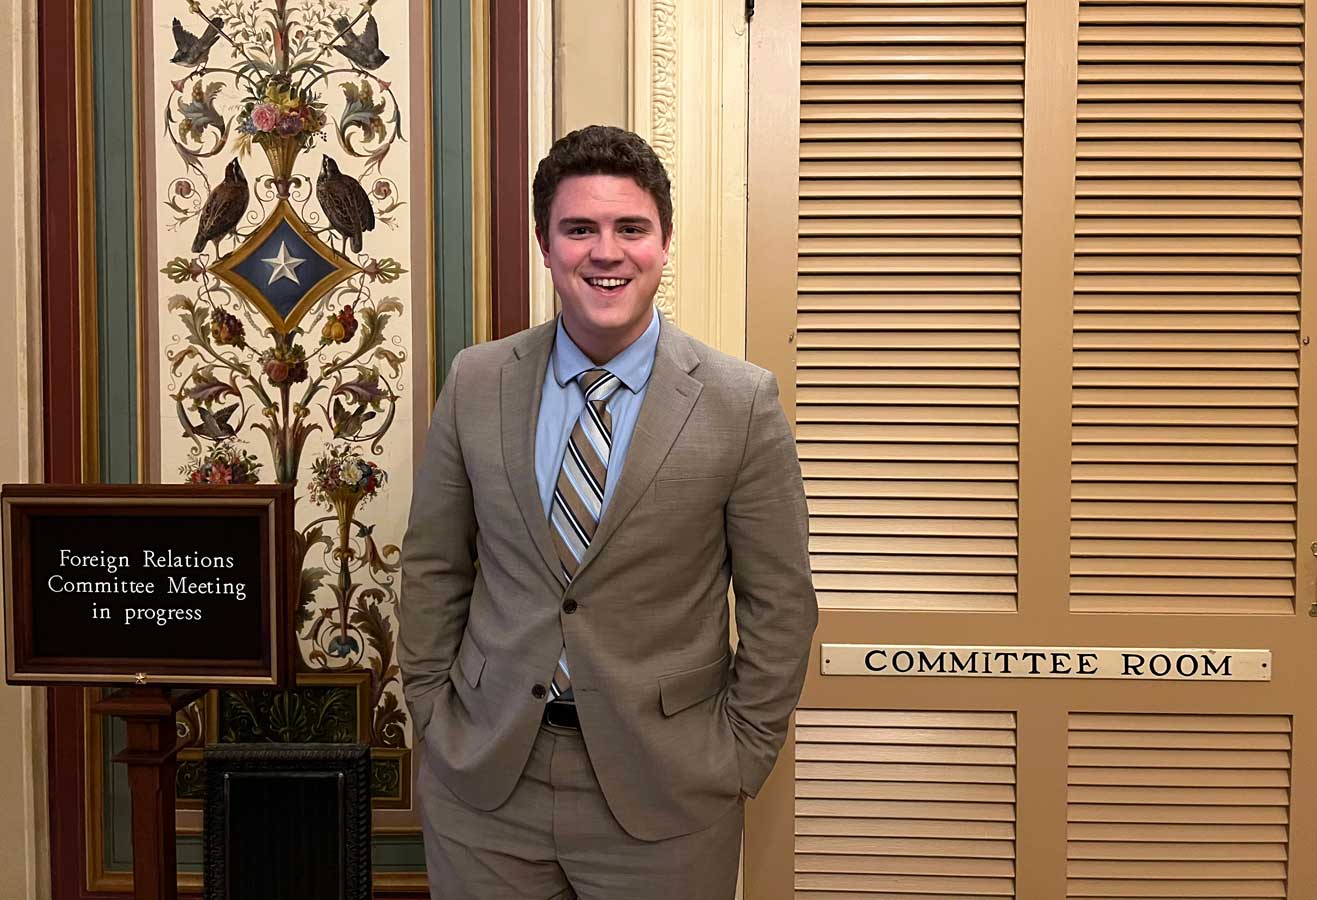 CHaSS student Chase Harward worked with USU's IOGP to intern with the Senate Foreign Relations Committee